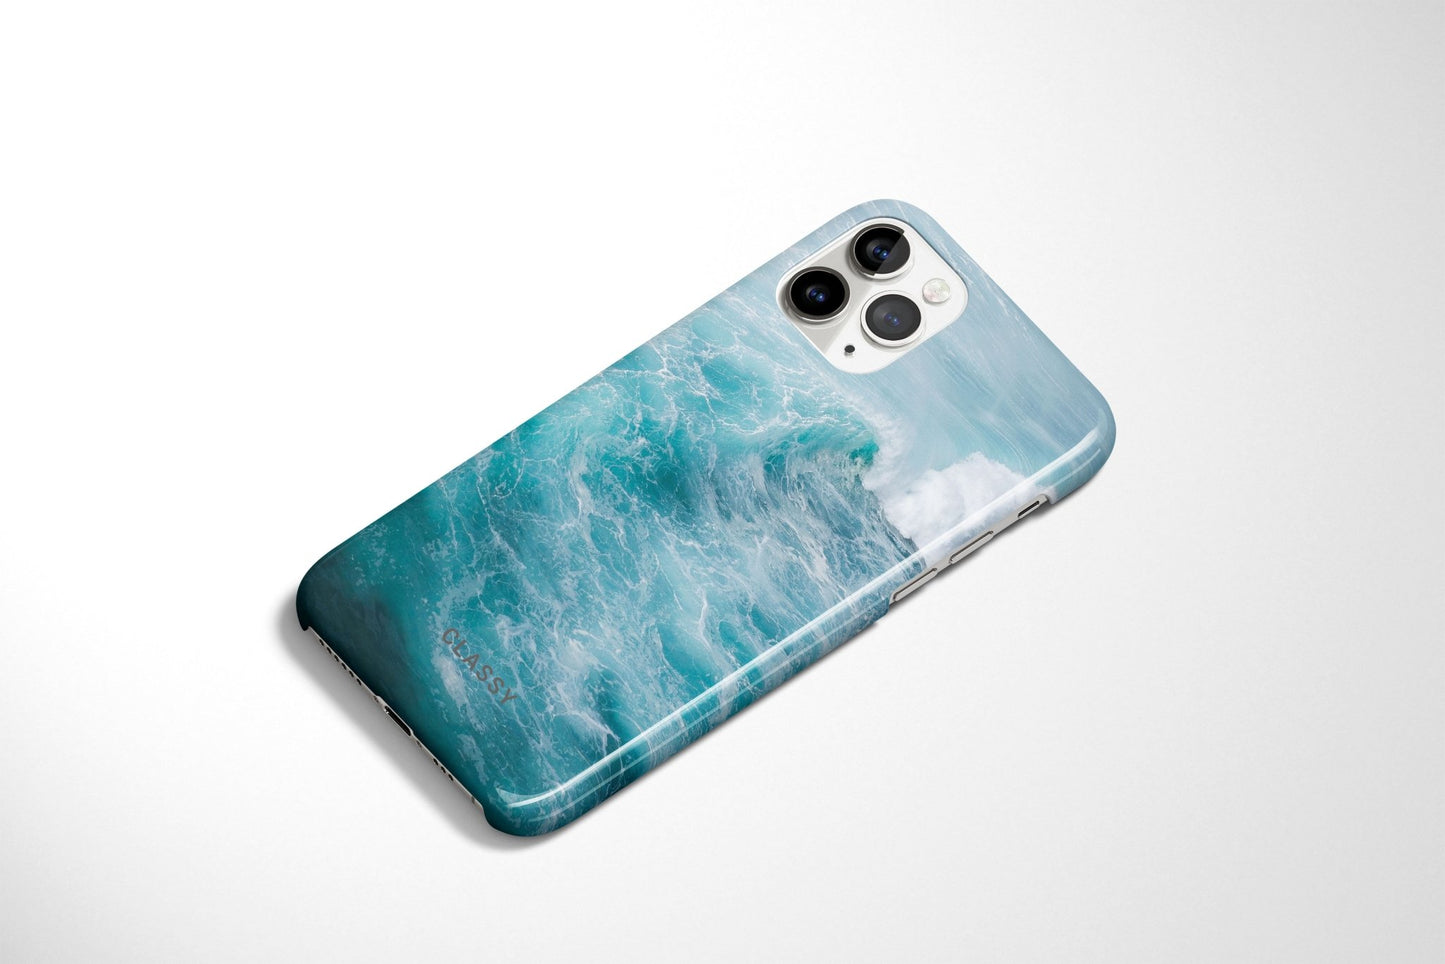 Ocean Waves Snap Case - Classy Cases - Phone Case - iPhone 12 Pro Max - Glossy -